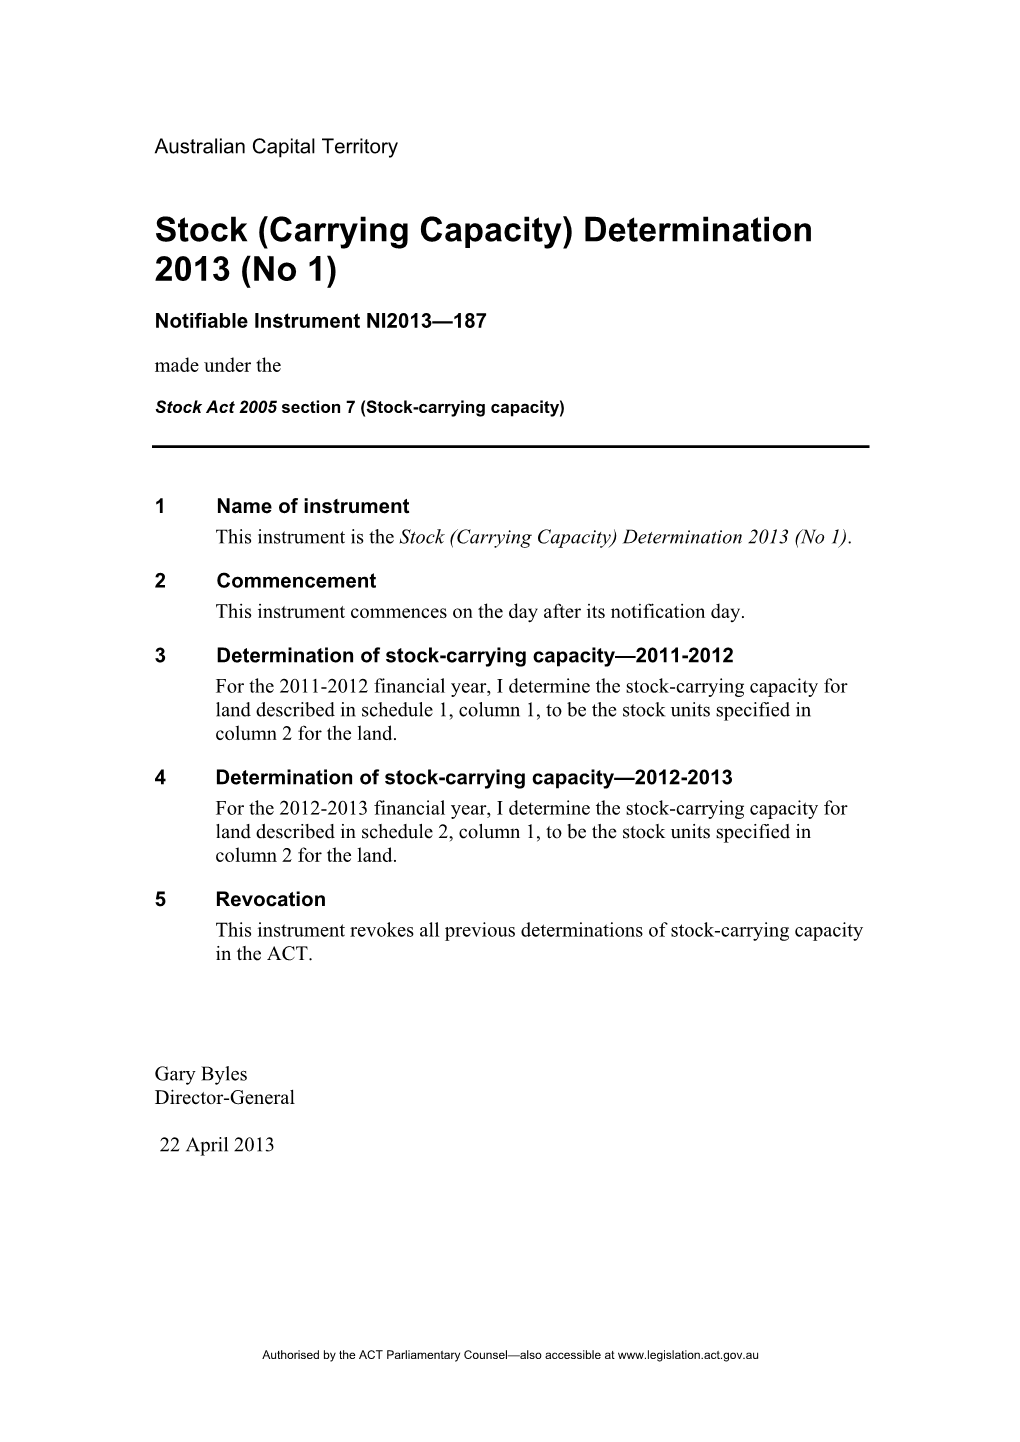 Carrying Capacity) Determination 2013 (No 1)